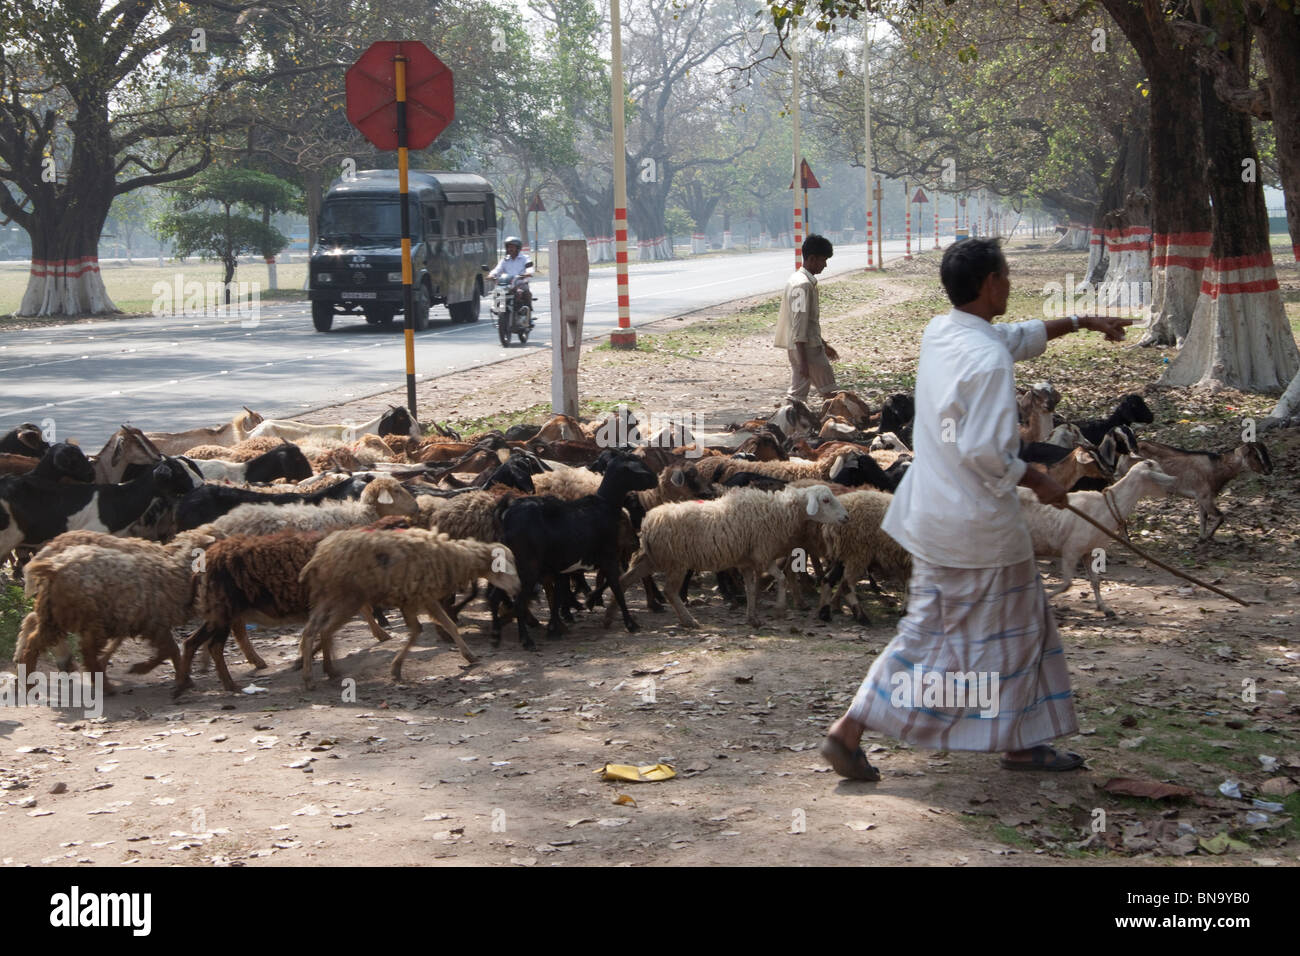 A shepherd with his sheep flock at the 'Maidan' (ground) in Kolkata (Calcutta), West Bengal, India. Stock Photo